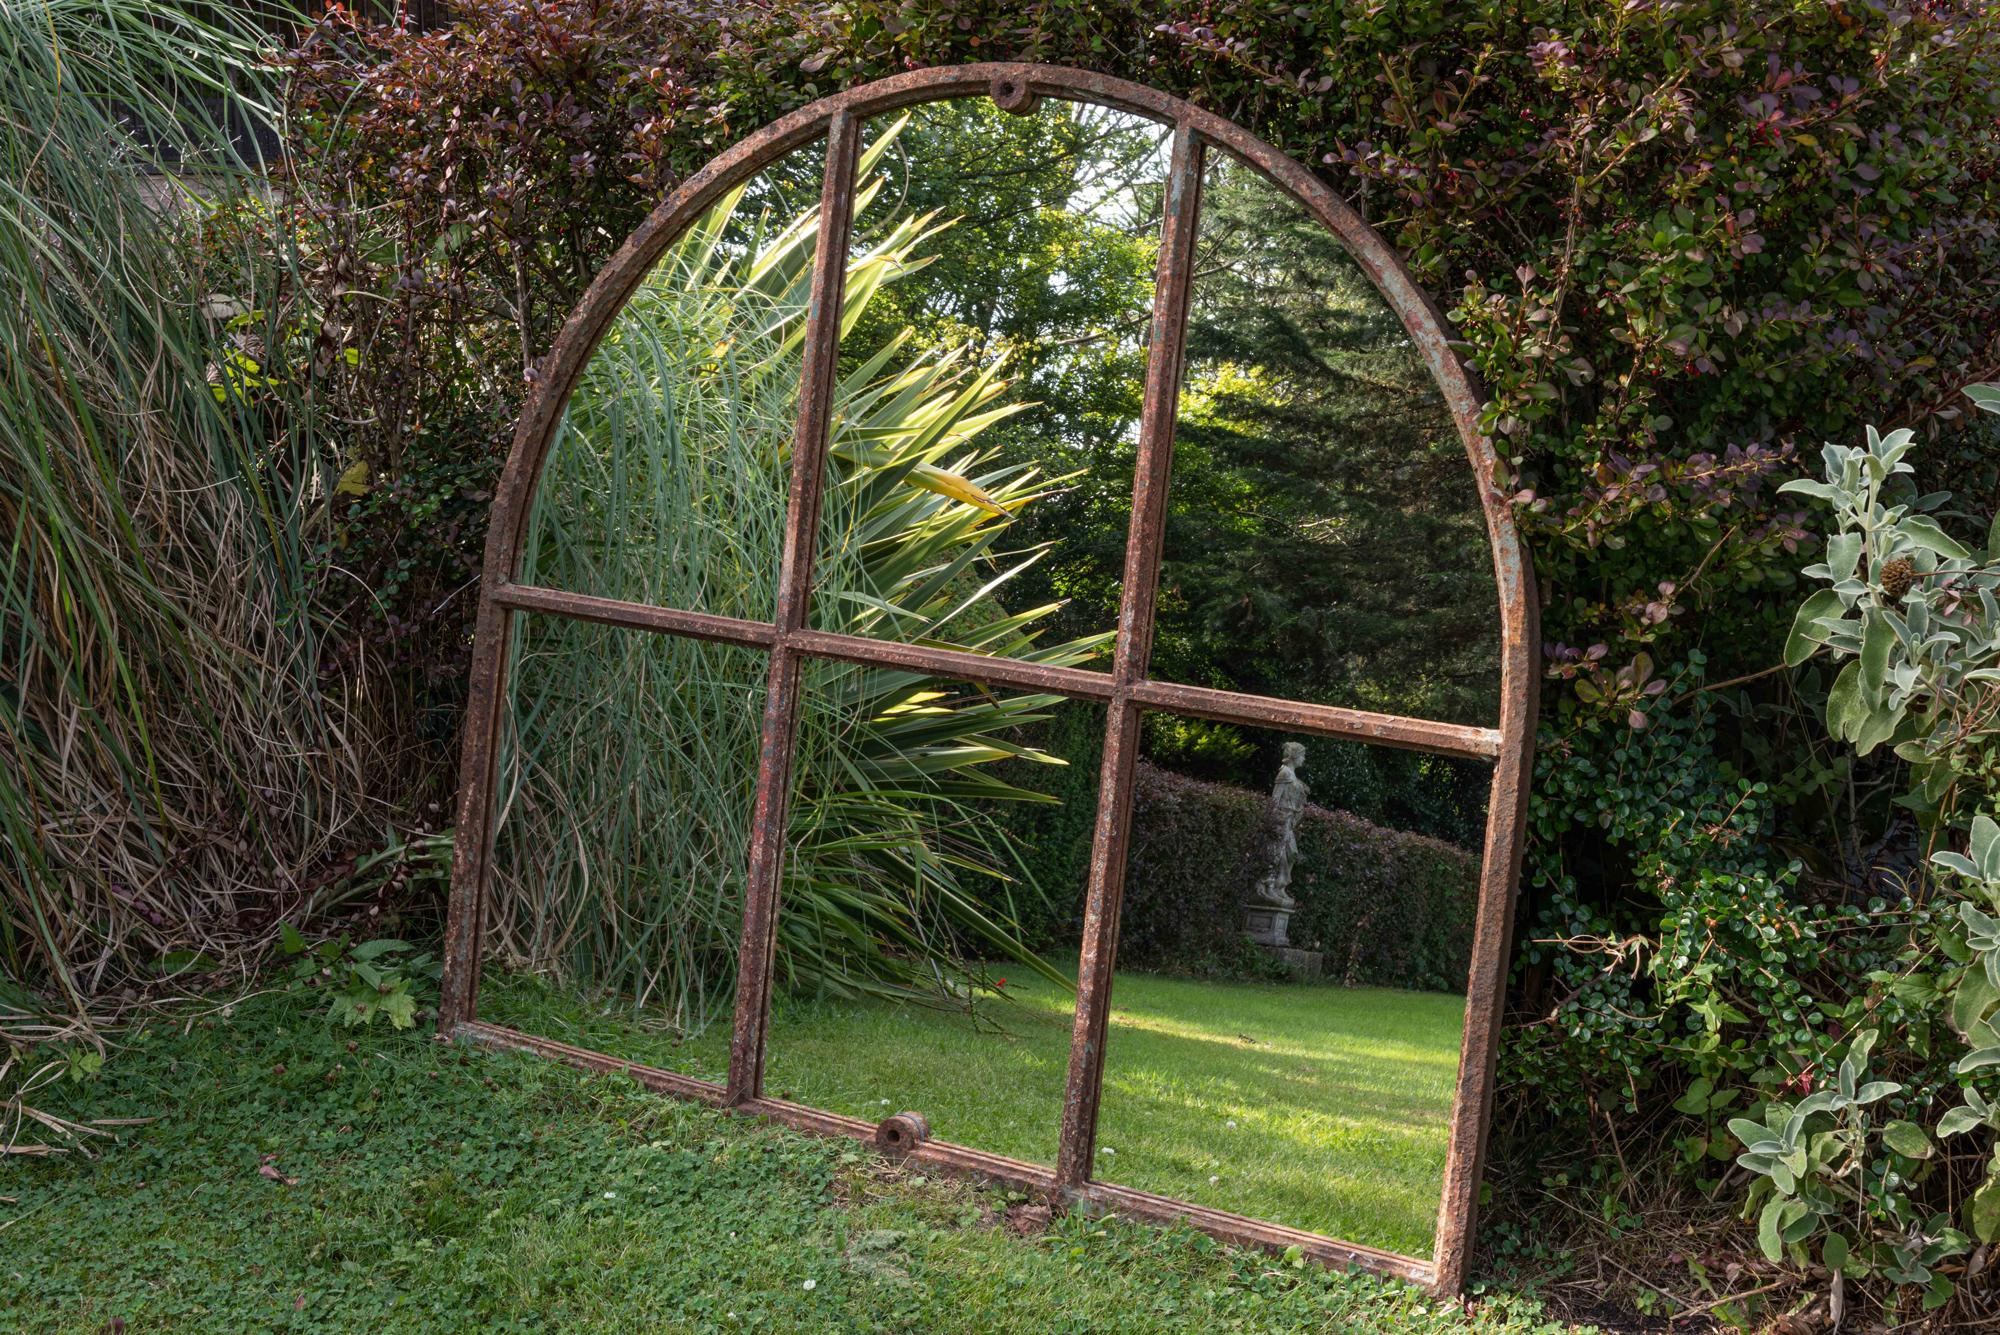 19th century cast iron arched window mirror,
circa 1870.

Large cast iron arched window mirror with original paint.

An excellent option for the garden or indoors.

Measures: 117 H x 125 W x 4 D cm.